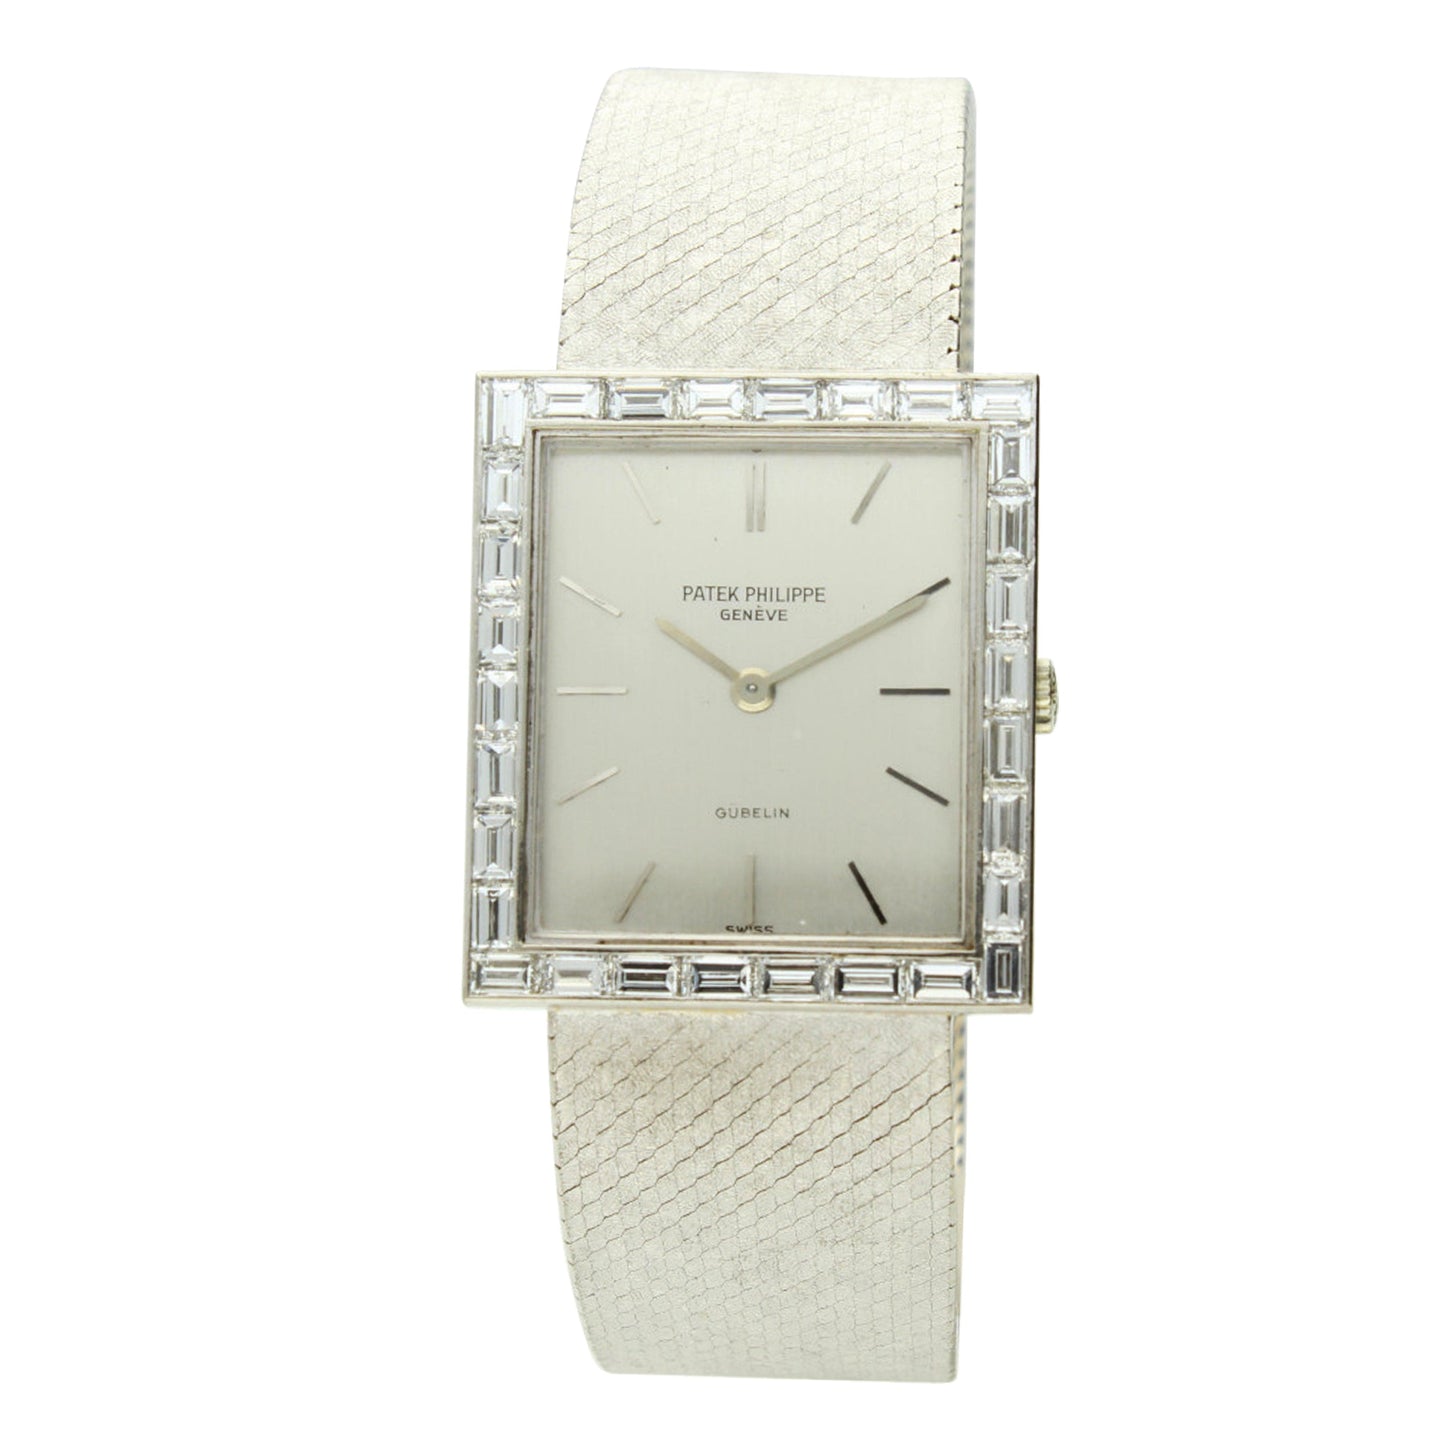 18ct white gold square cased wristwatch with diamond set bezel. Made 1970's